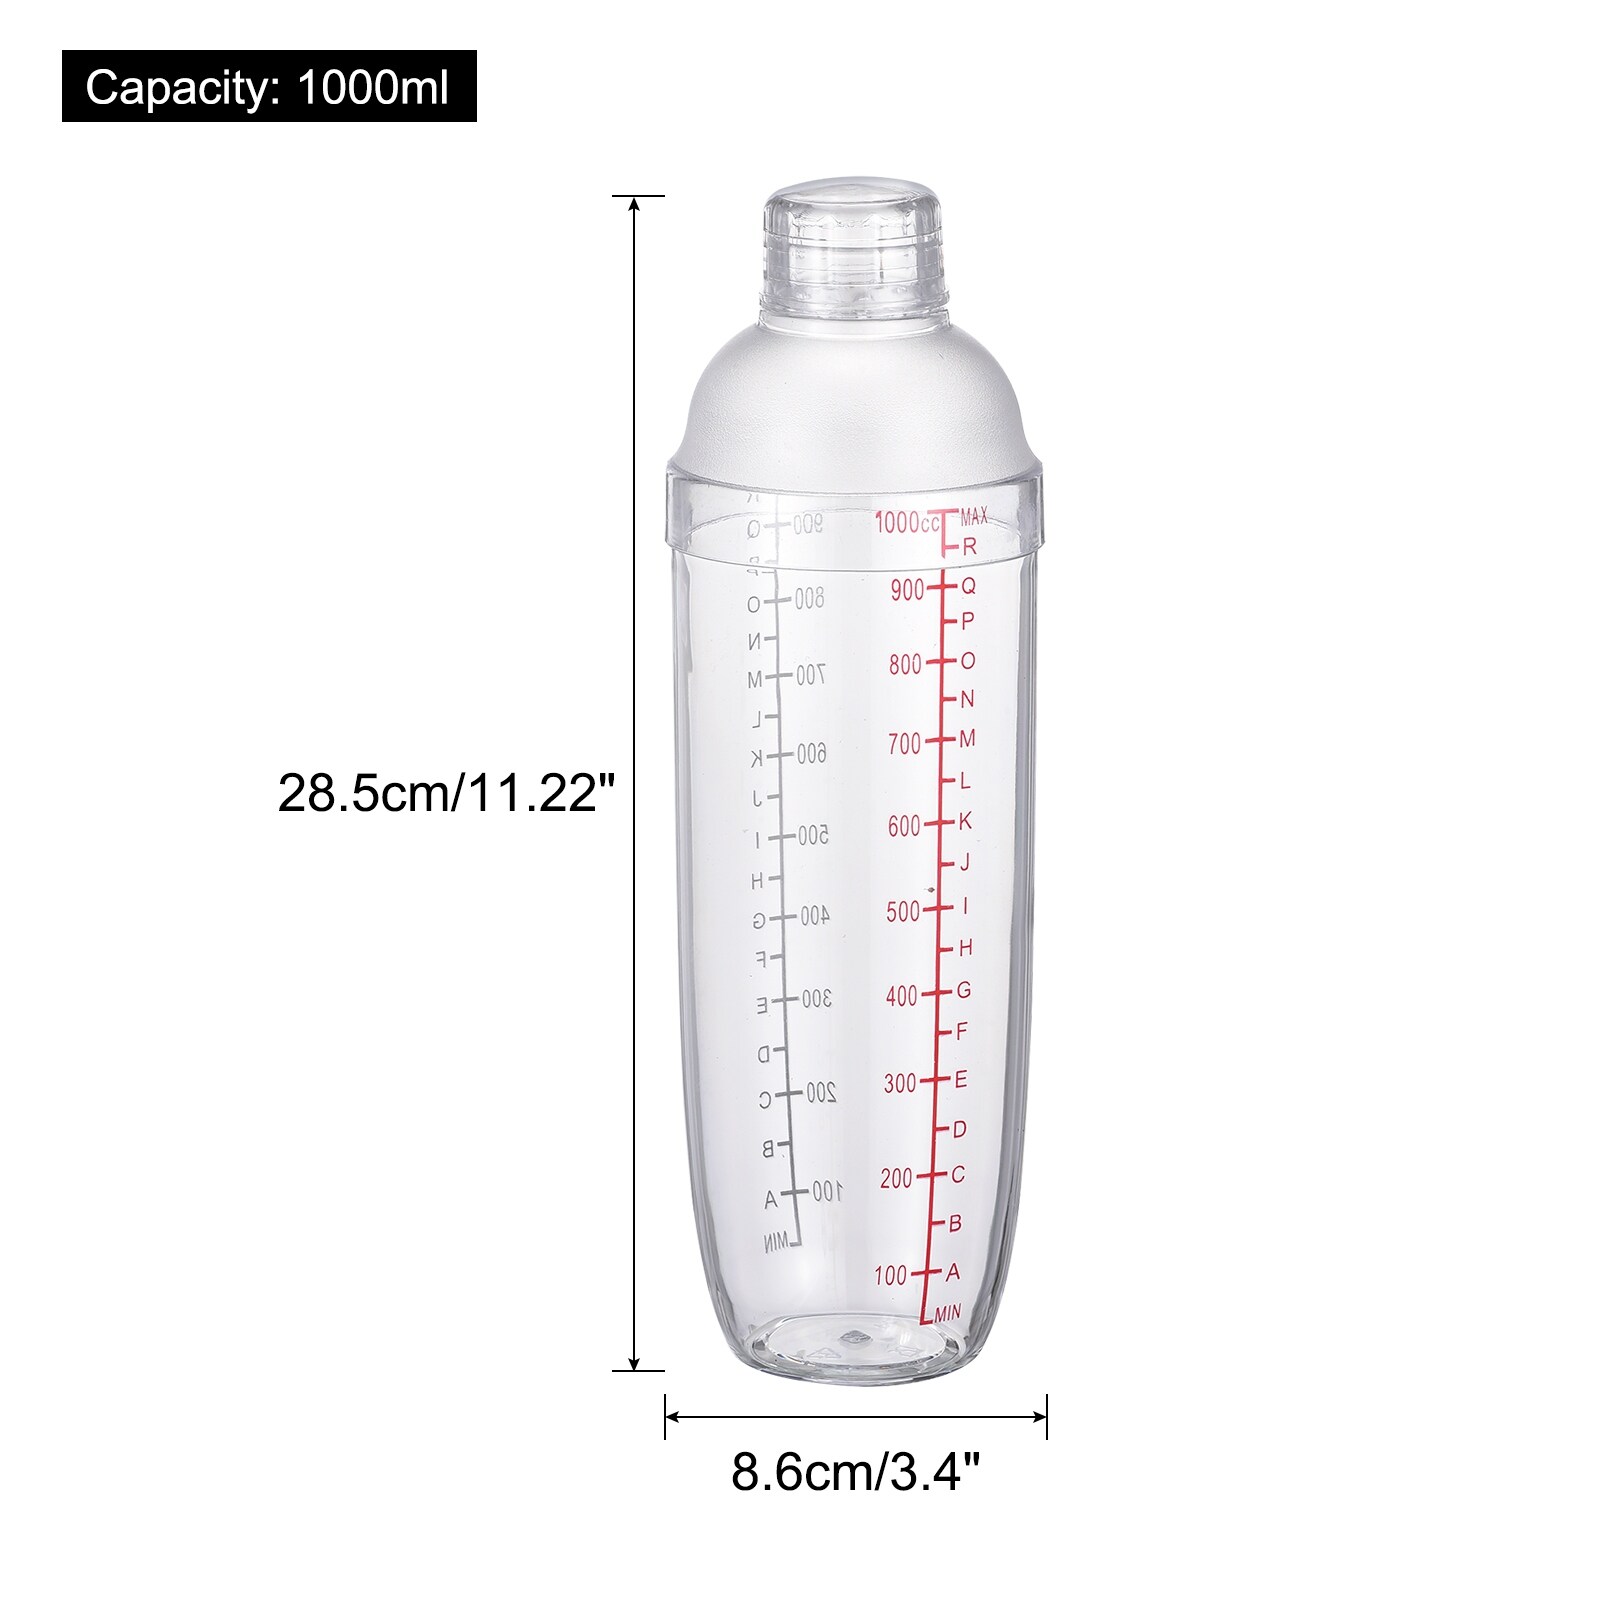 https://ak1.ostkcdn.com/images/products/is/images/direct/16cea74bfeabe0c5fe90cdb951209925699a87b1/1000ml-Clear-Plastic-Cocktail-Shaker-Cup-Scale-Wine-Beverage-Mixer-Drink-Tools.jpg